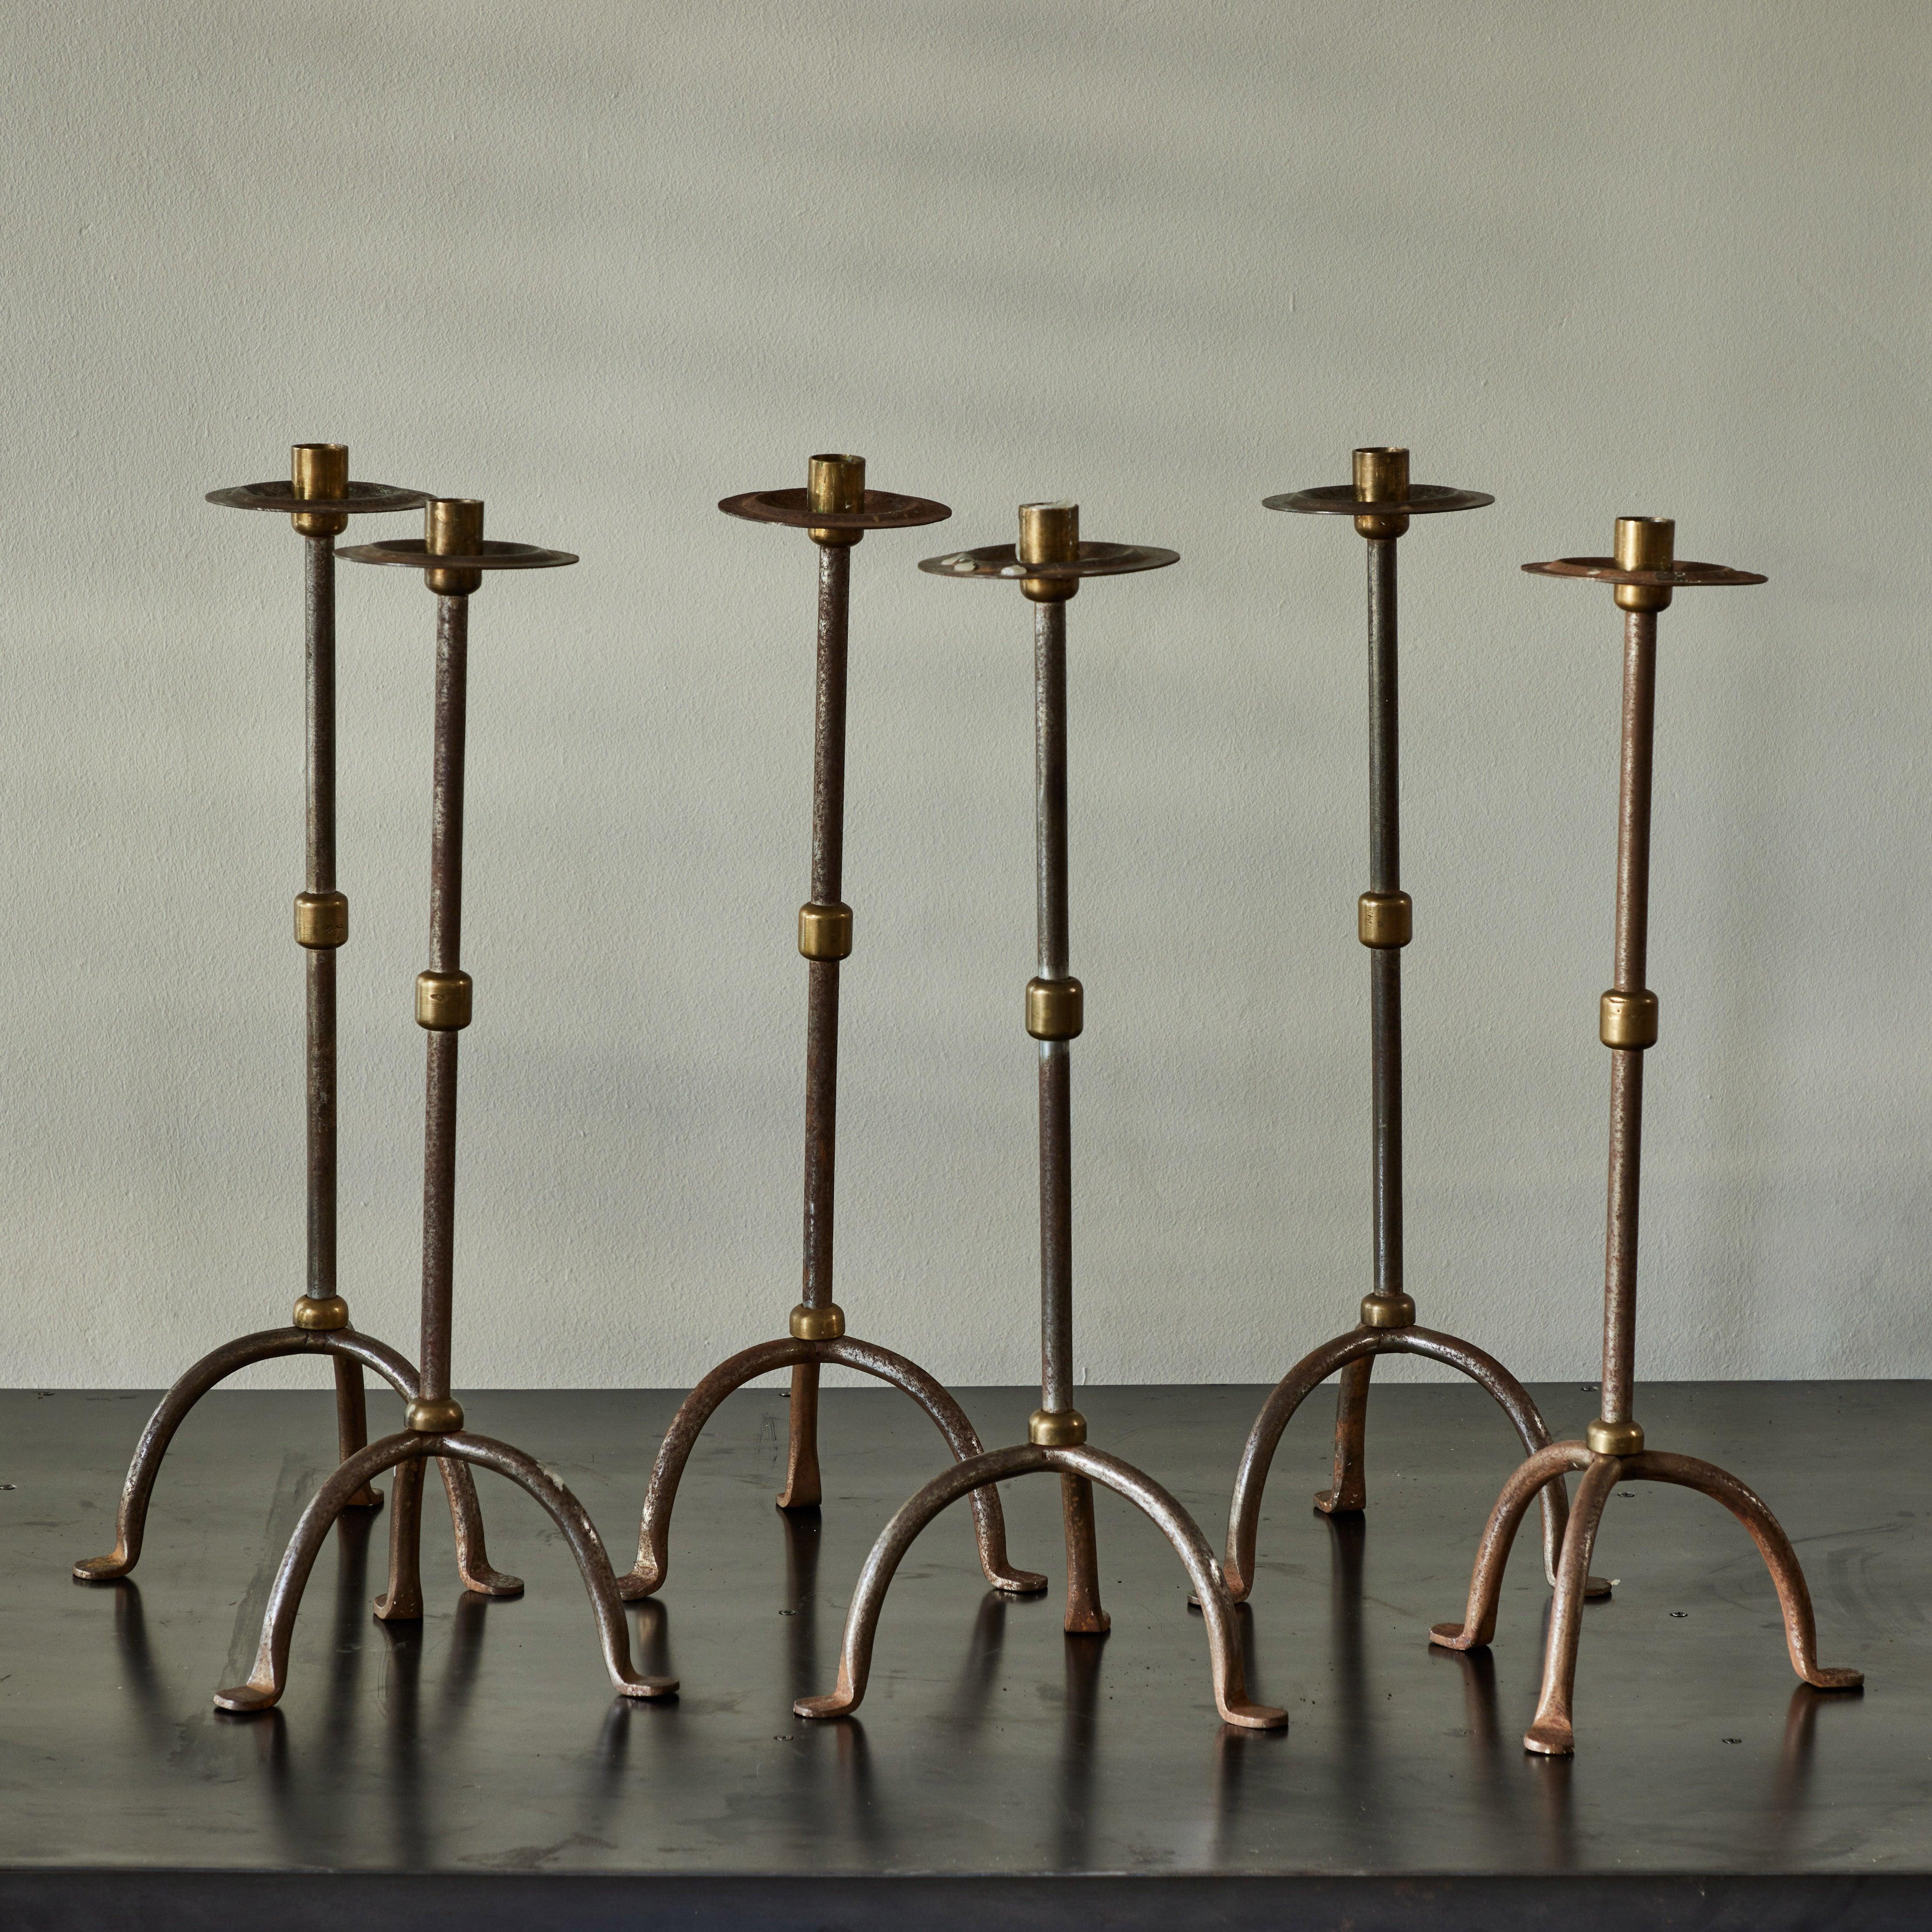 Late 19th-century English steel and brass candlesticks in the Arts & Crafts style. Delicate yet dramatic, these candlesticks add height and a pleasing linearity to any space. Priced in pairs. (Three pairs available).

England, circa